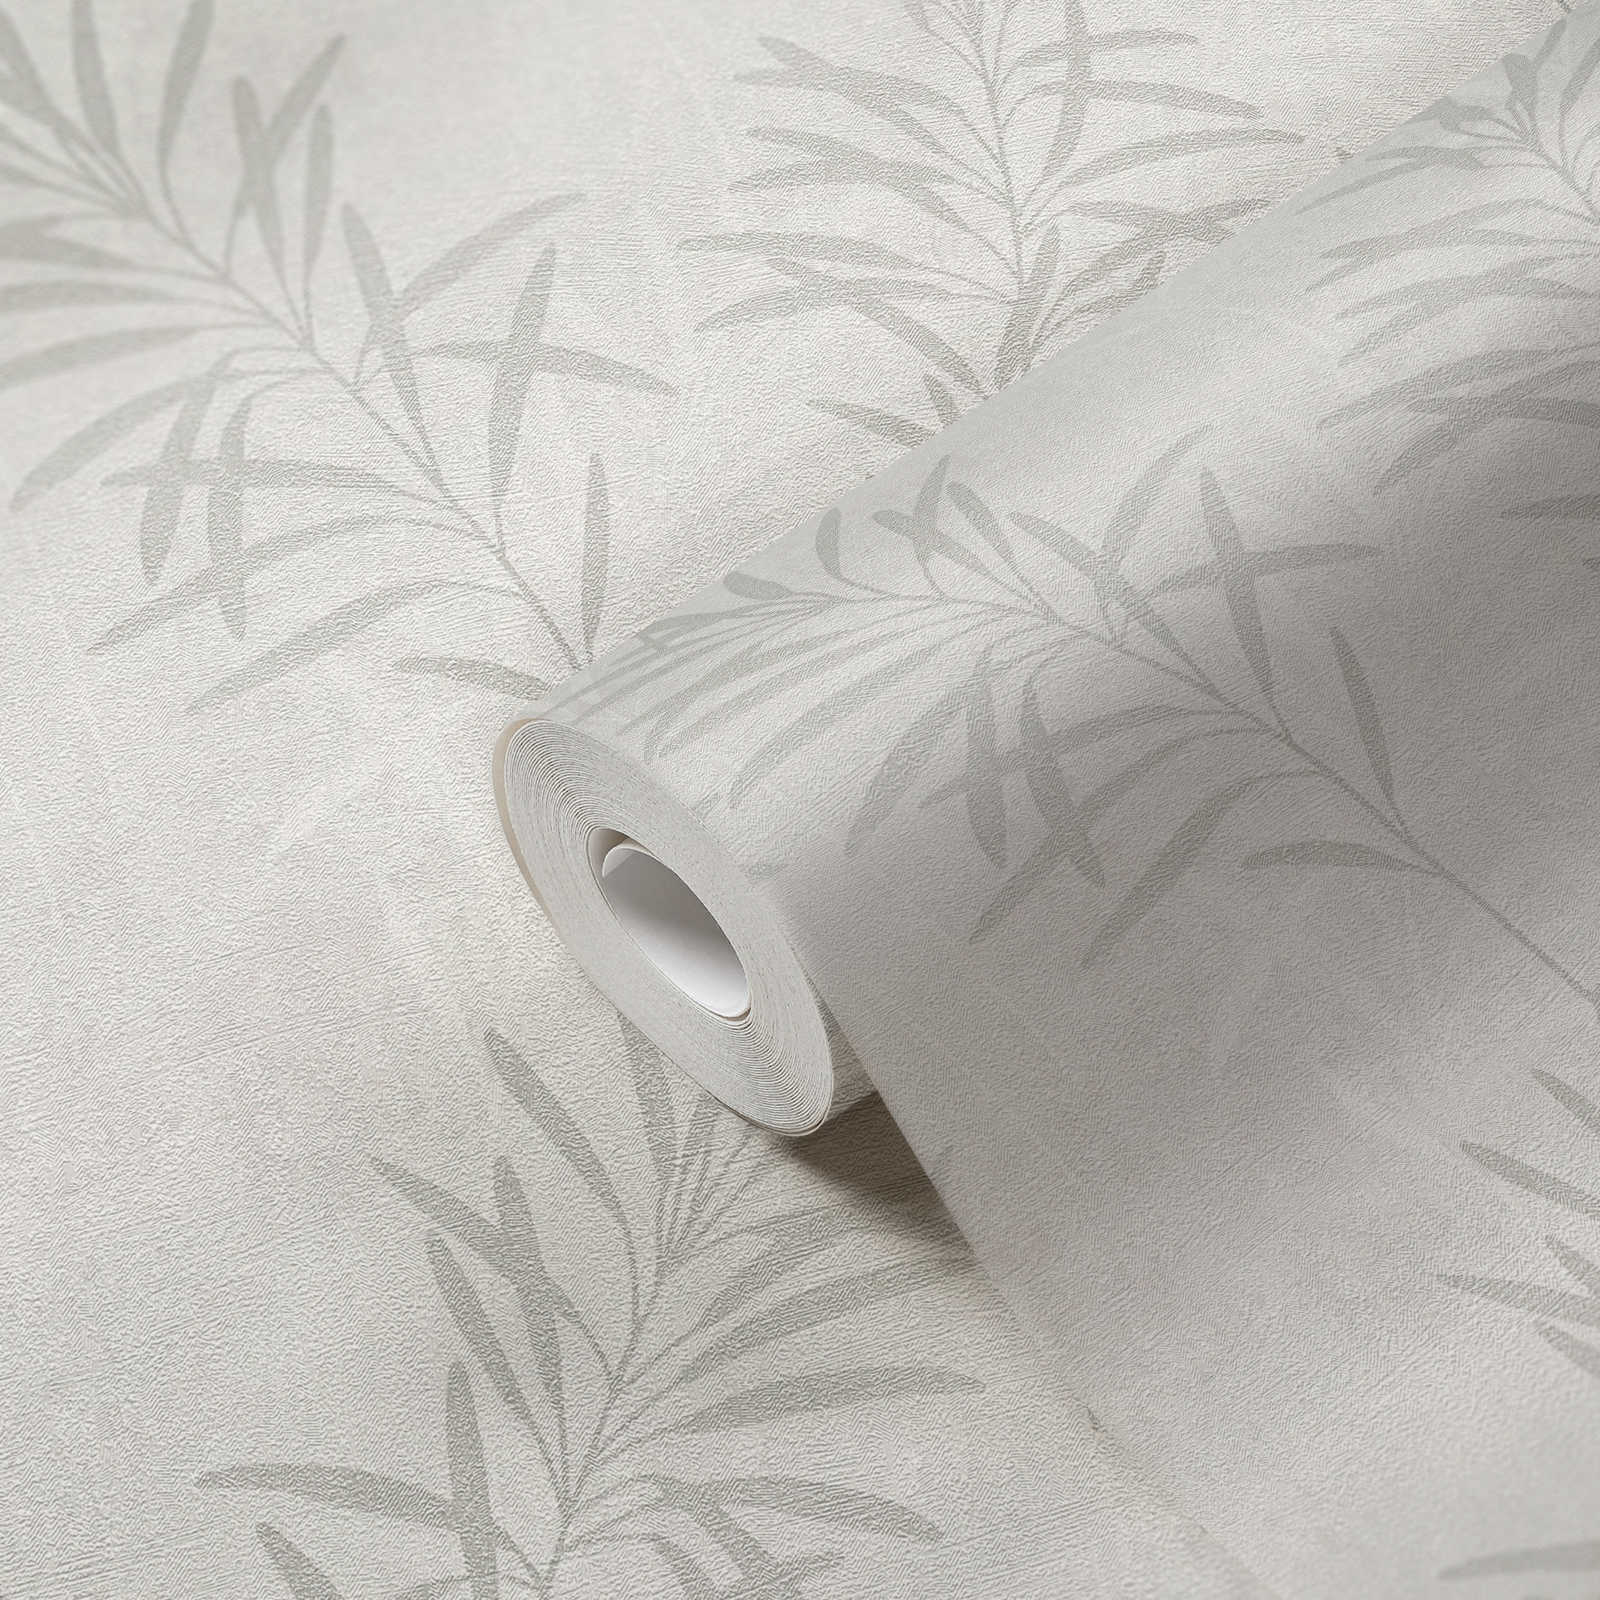             Floral non-woven wallpaper with grass pattern and fine structure - white, grey, metallic
        